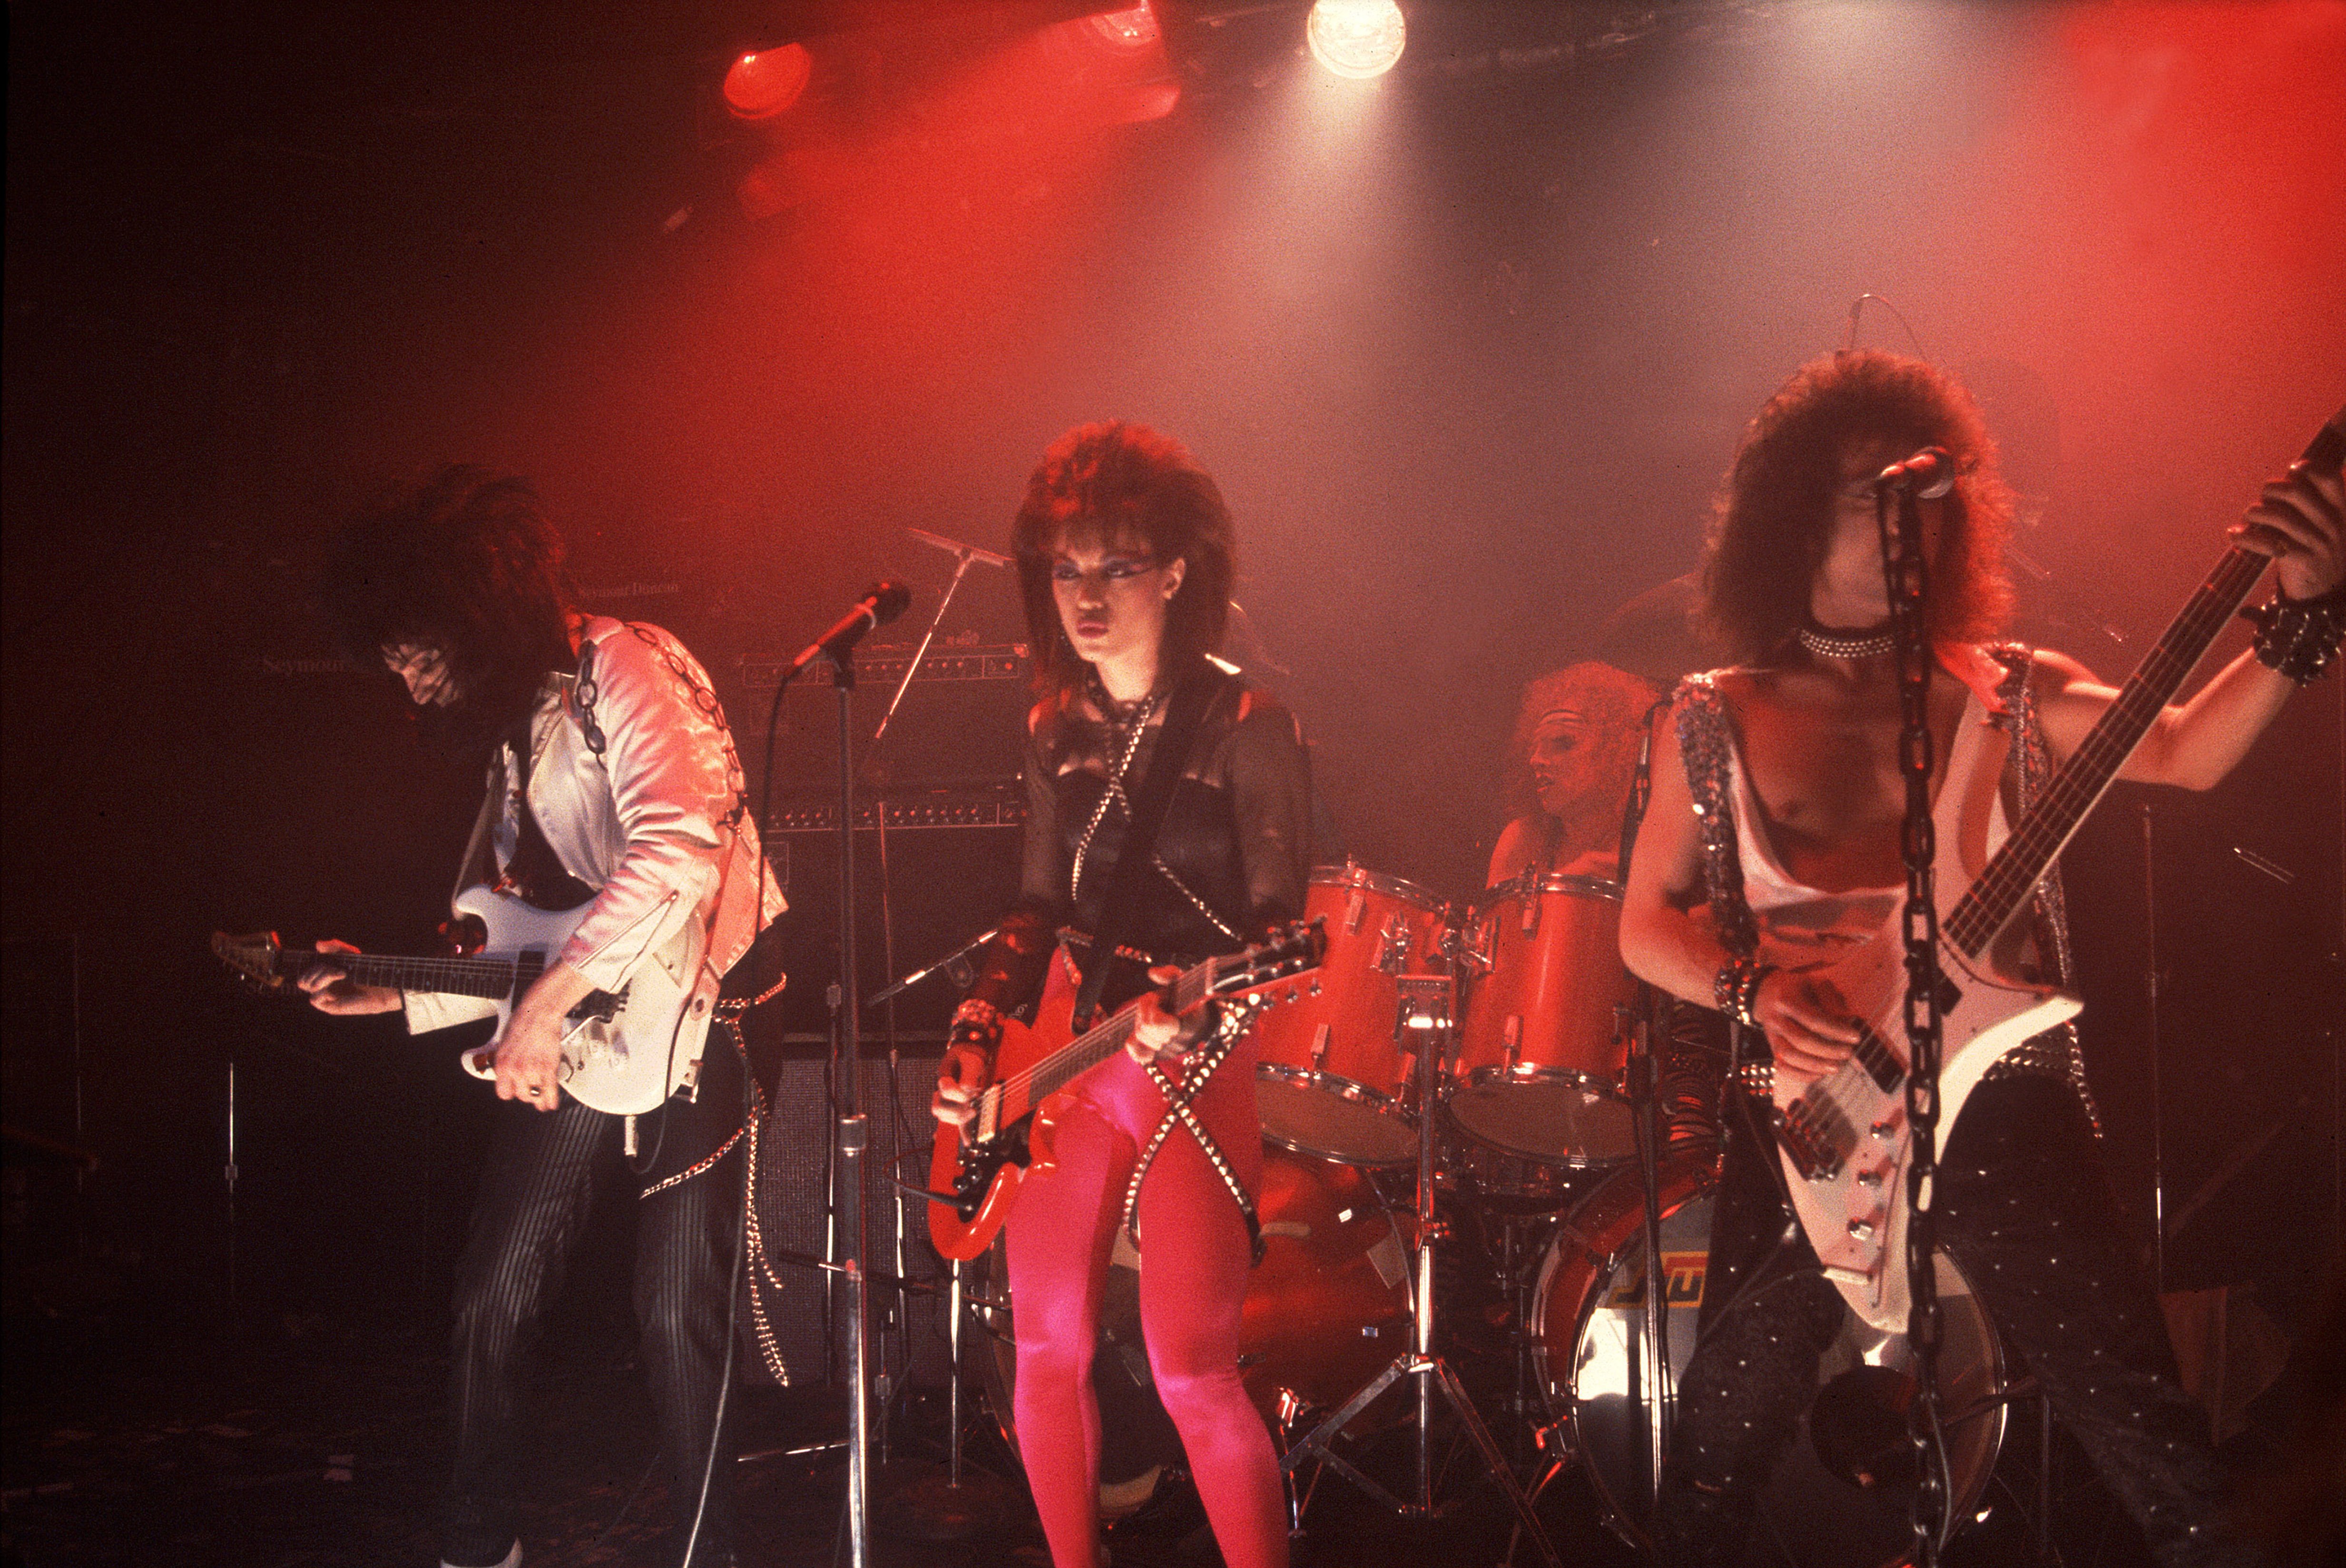 Joan Jett (center) pictured as she performs onstage at the Thirsty Whale bar during filming of the movie 'Light of Day' (directed by Paul Schrader) on  April 7, 1986 in Chicago | Source: Getty Images